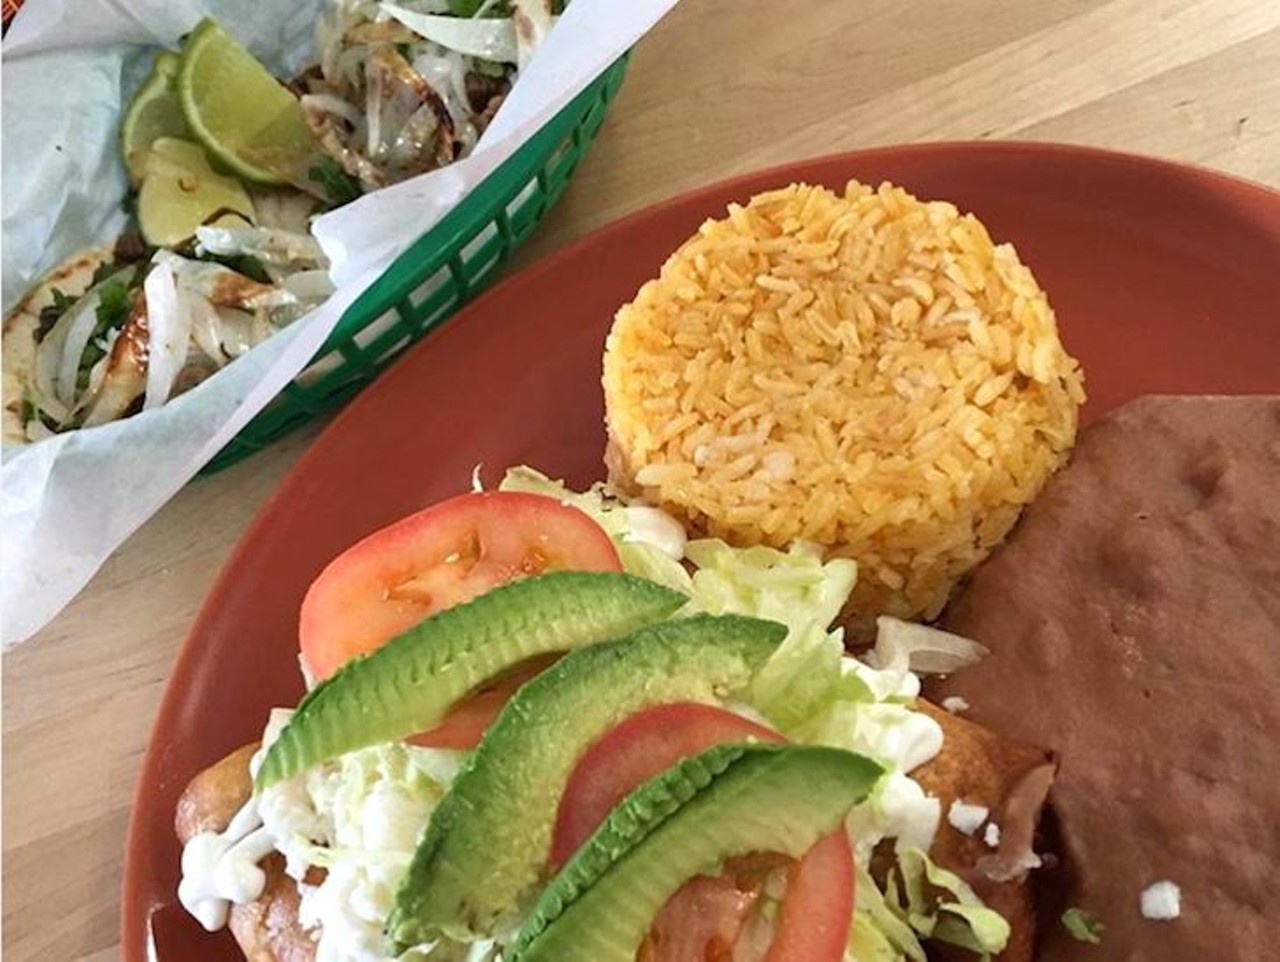 Las Cazuelas 
4024 S. Conway Road, 407-250-4608
Tucked away in this Conway grocery store is the Las Cazuelas restaurant. Add on a hearty side order of rice and beans to your taco order to complete the experience. 
Photo via casey_sliwastudios/Instagram